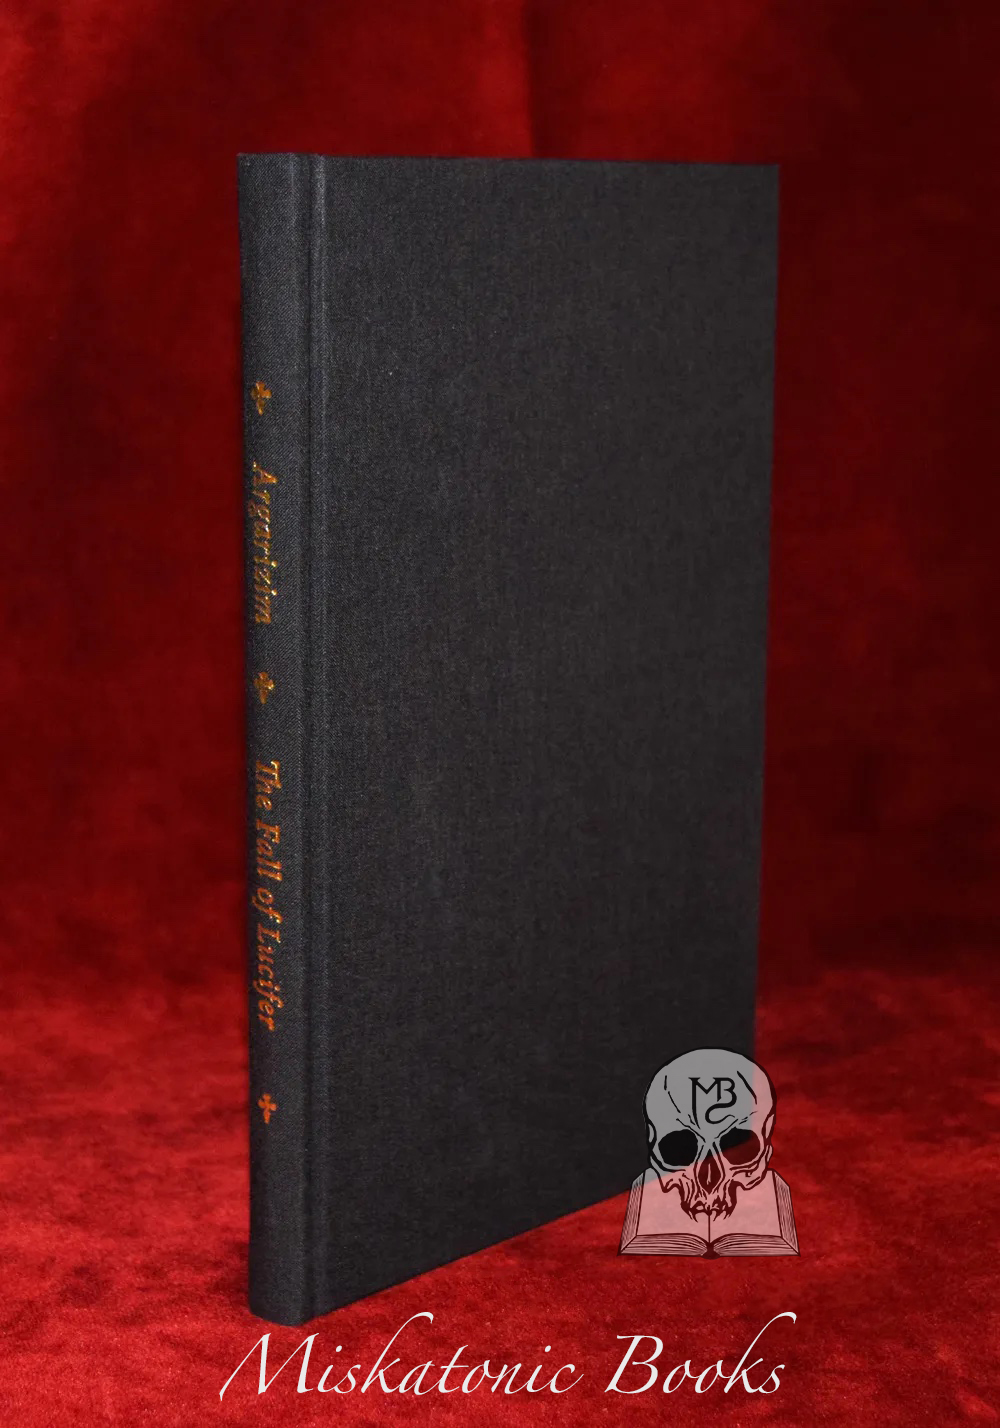 ARGARIZIM: THE FALL OF LUCIFER by Johannes Nefastos (Limited Edition Hardcover)